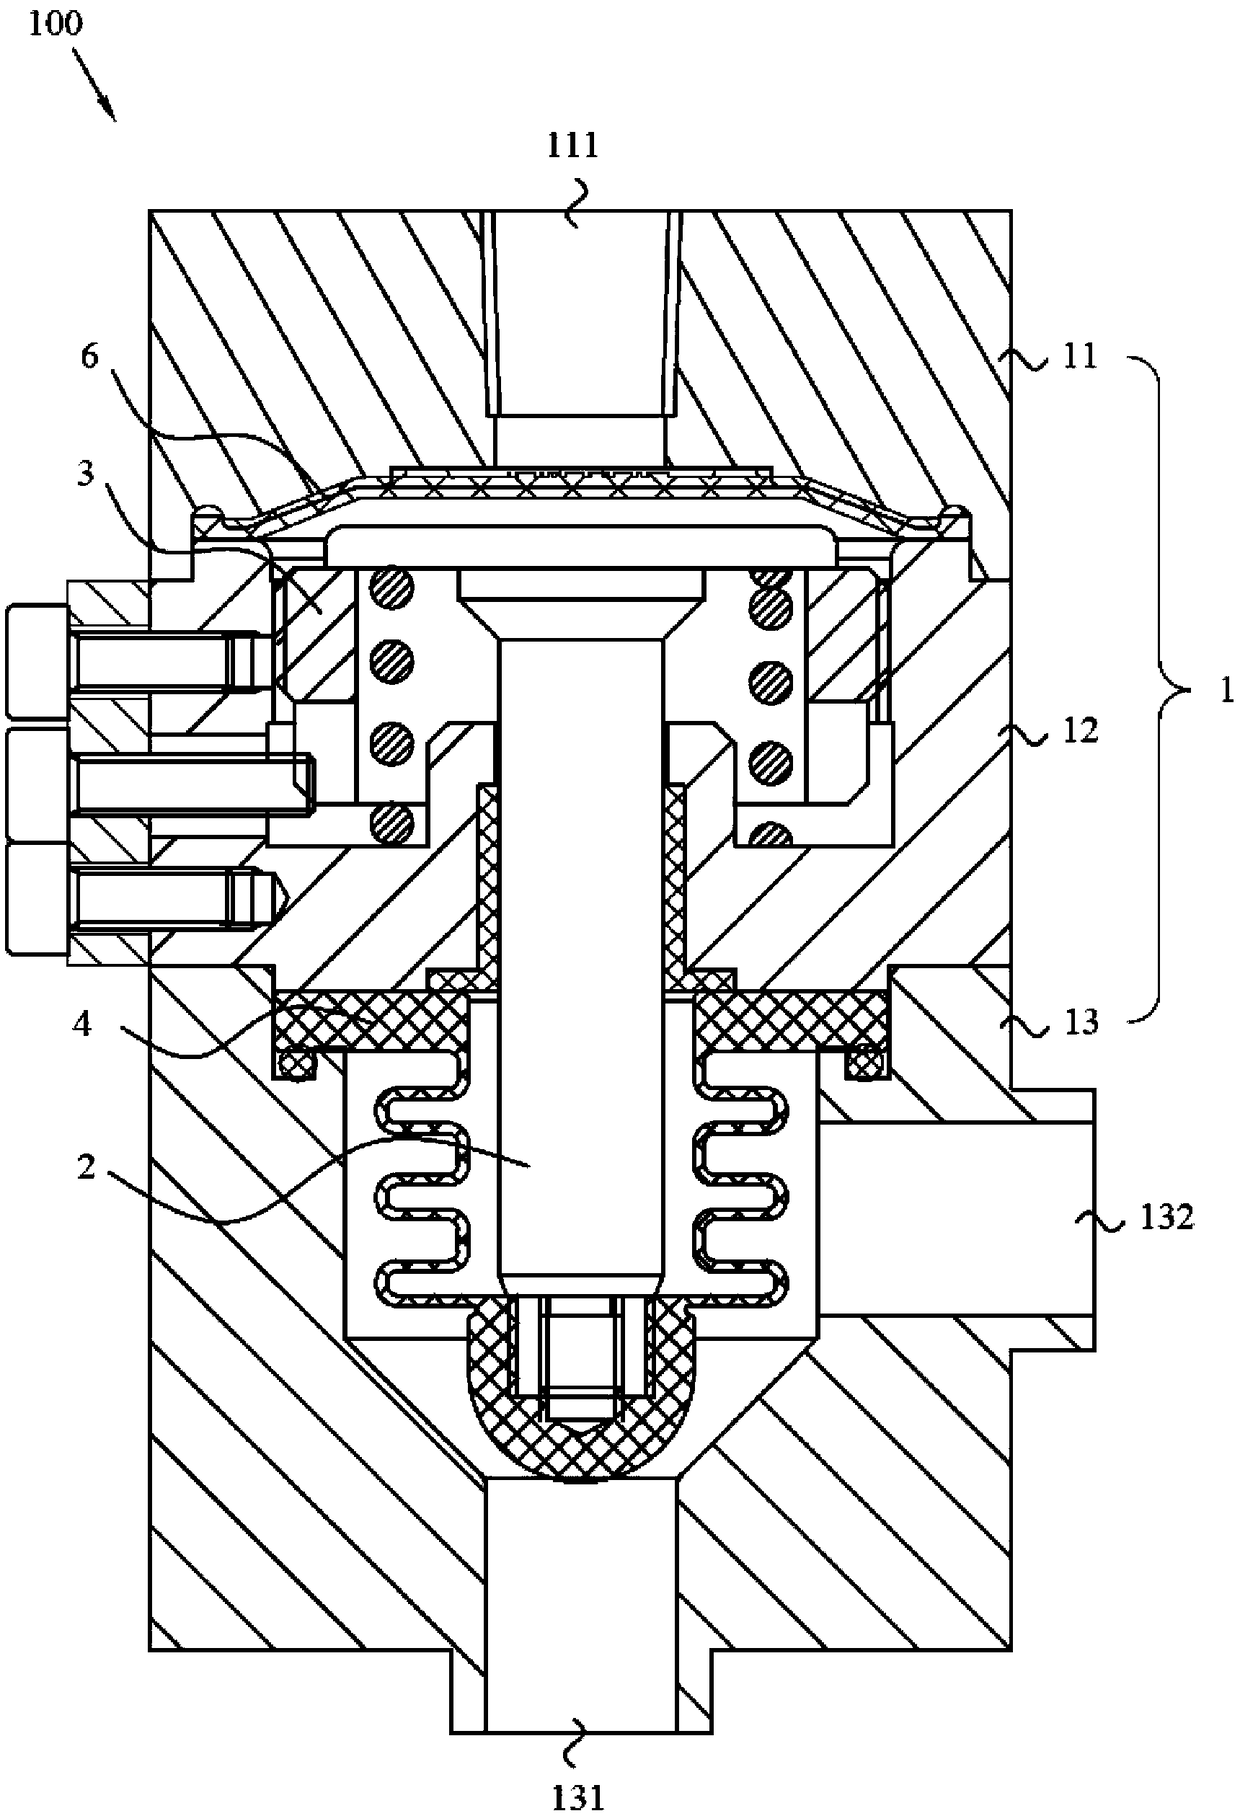 Flow limiting valve and filling equipment